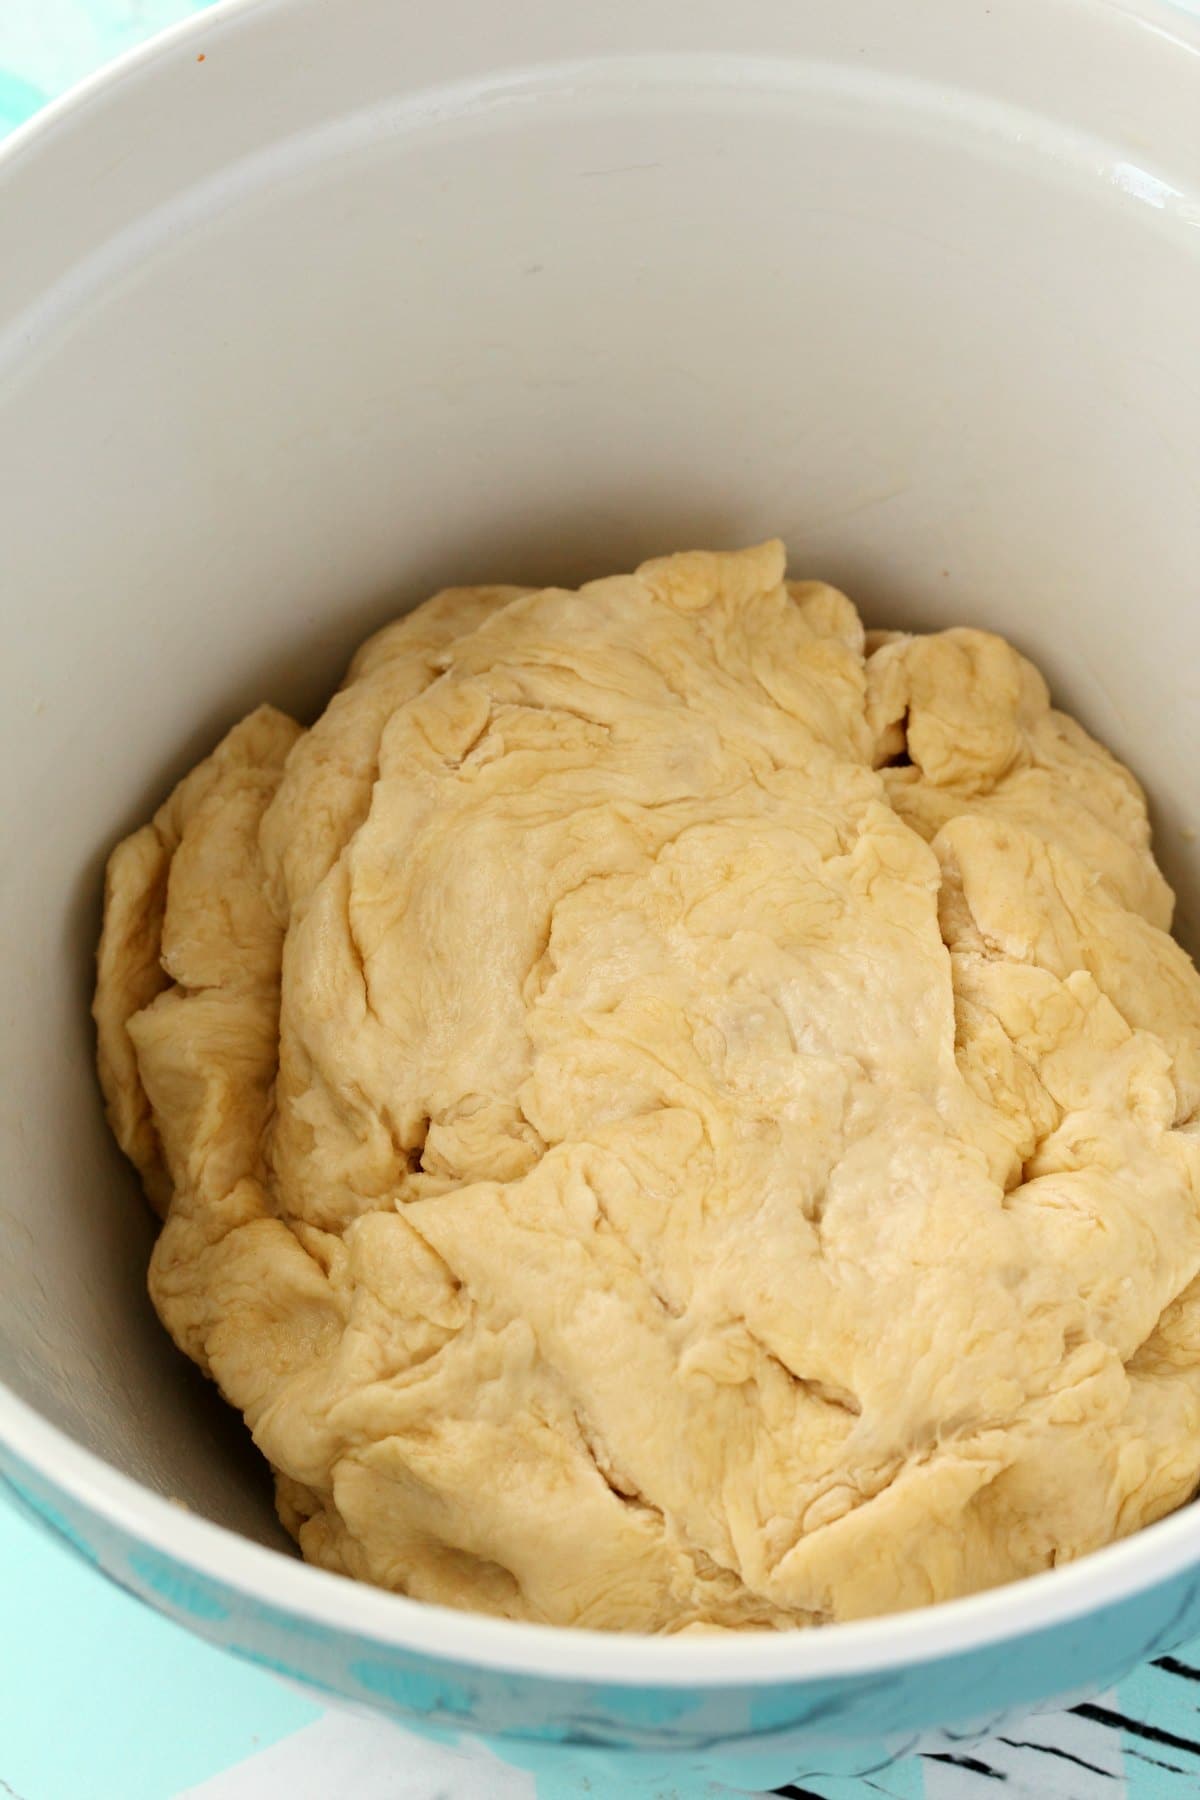 A ball of dough for vegan naan, in a blue and white mixing bowl. 